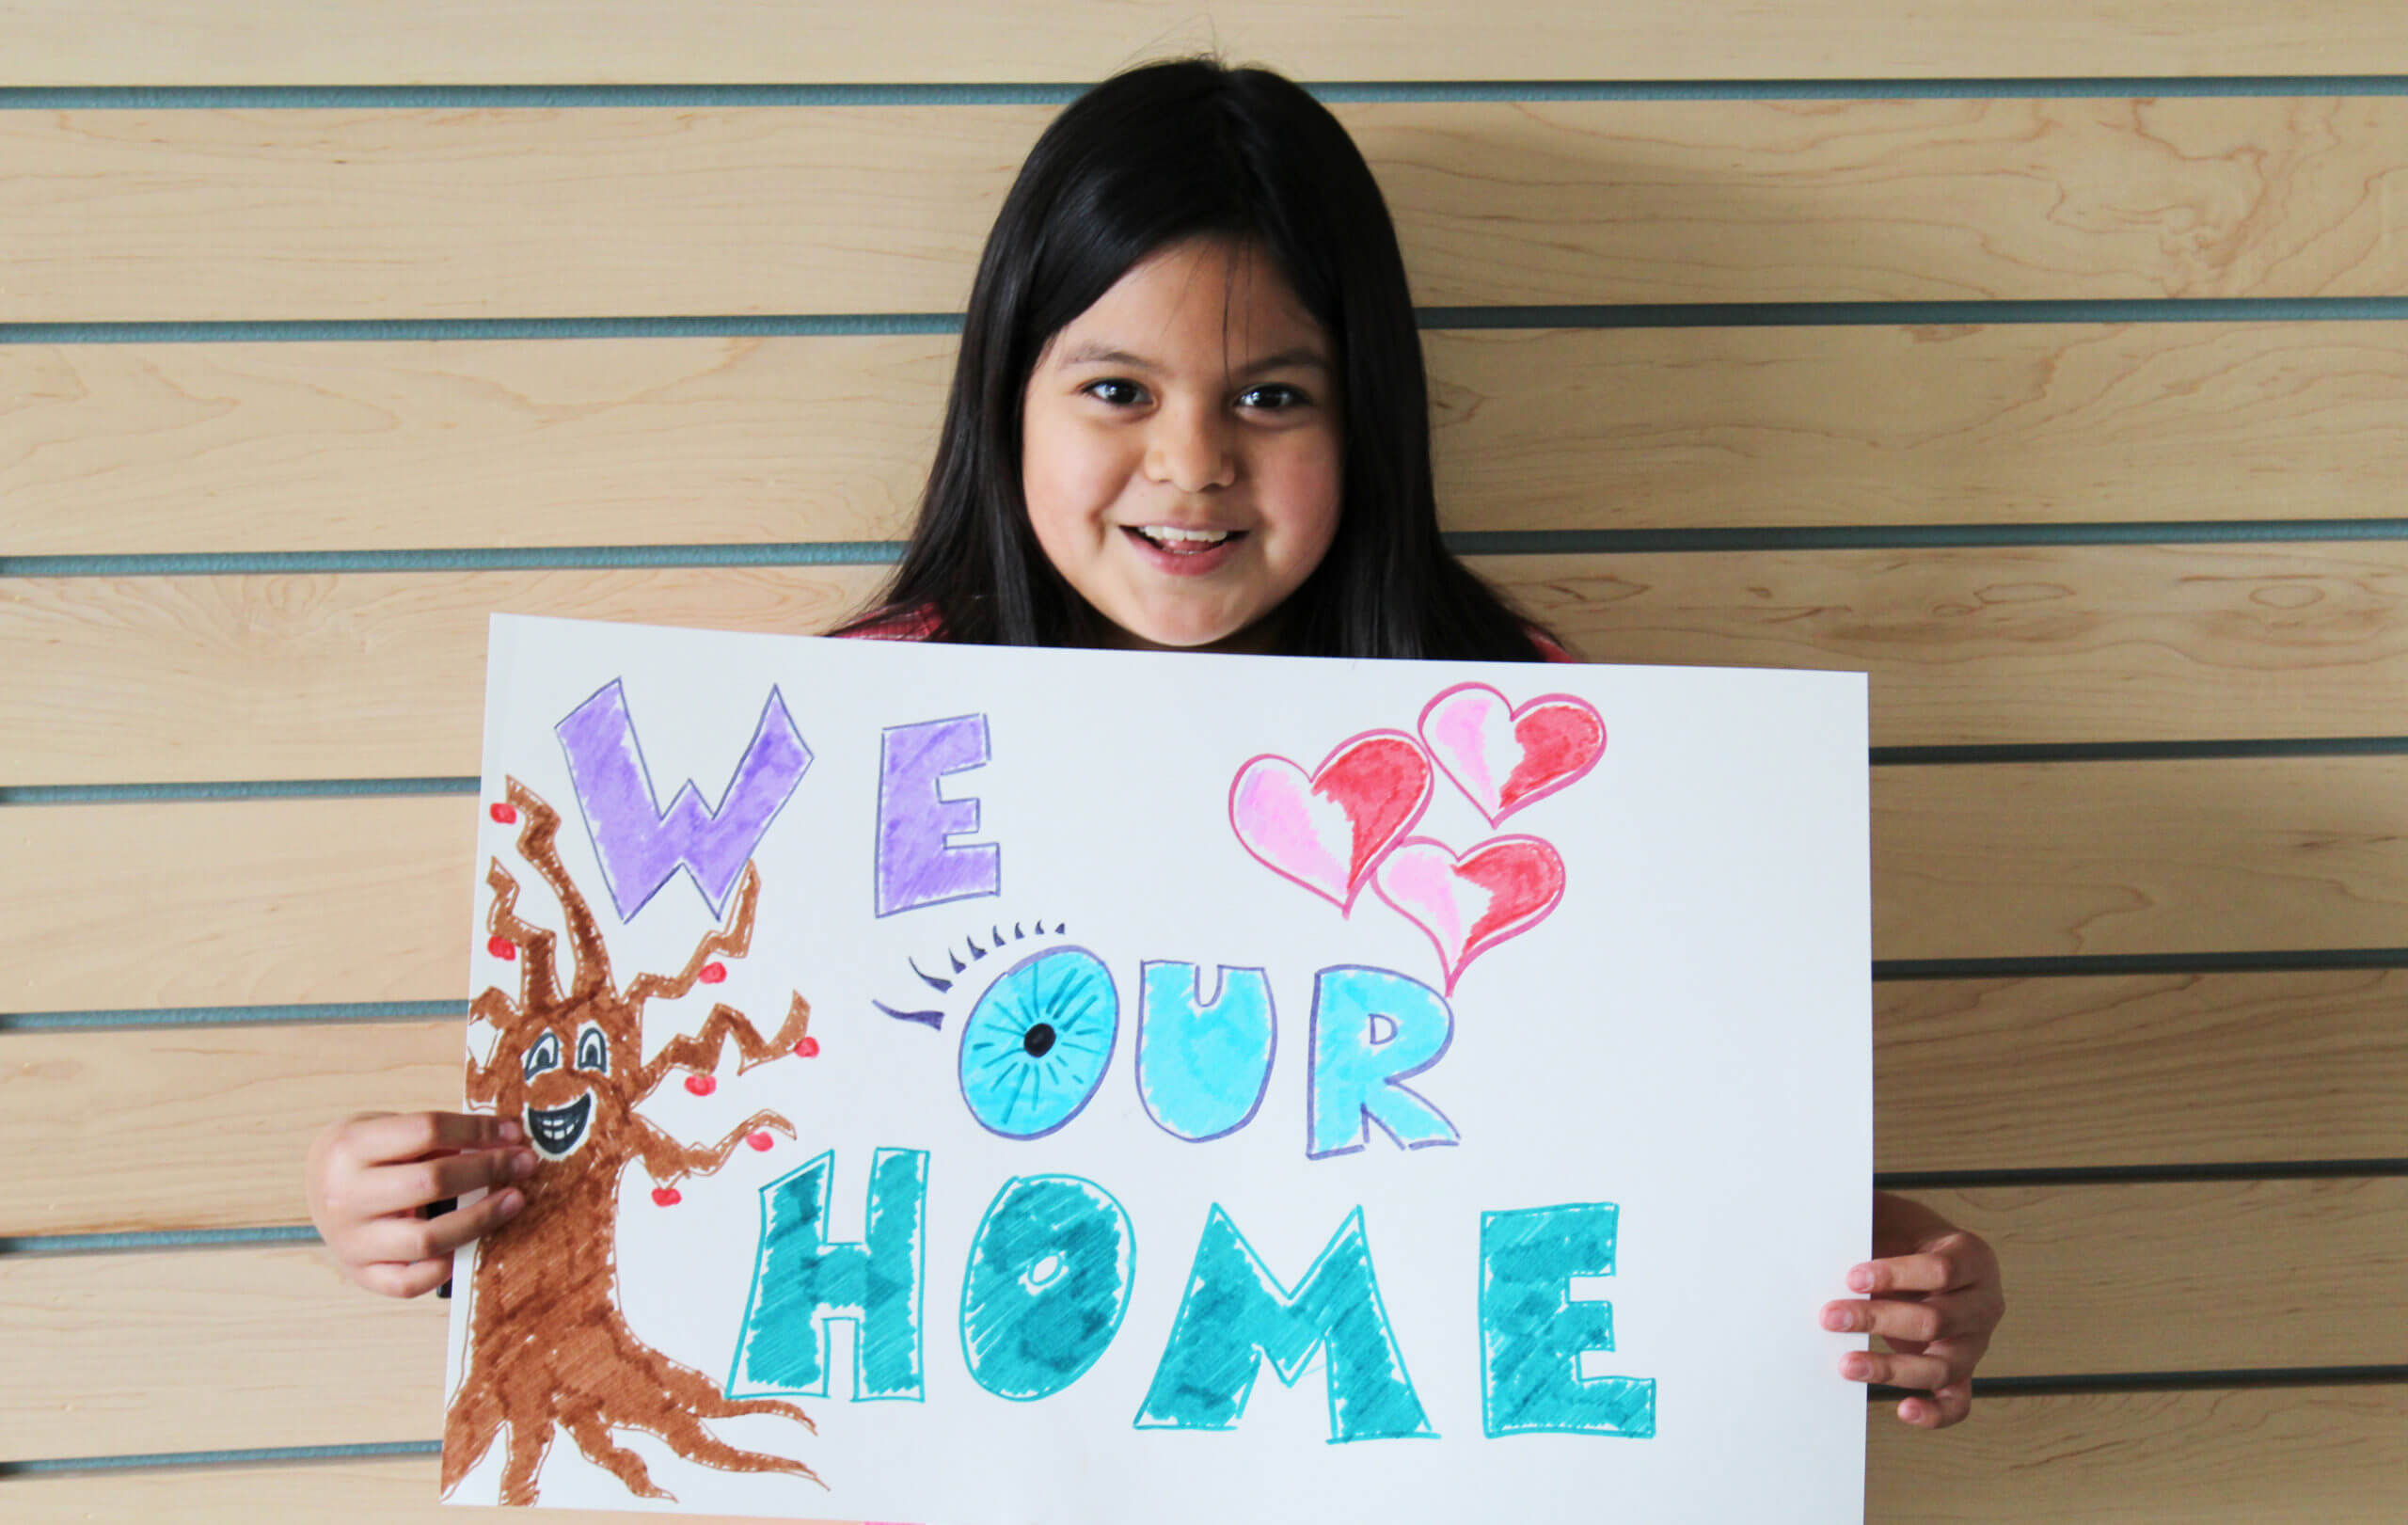 Small child holding sign that read 'We our home'